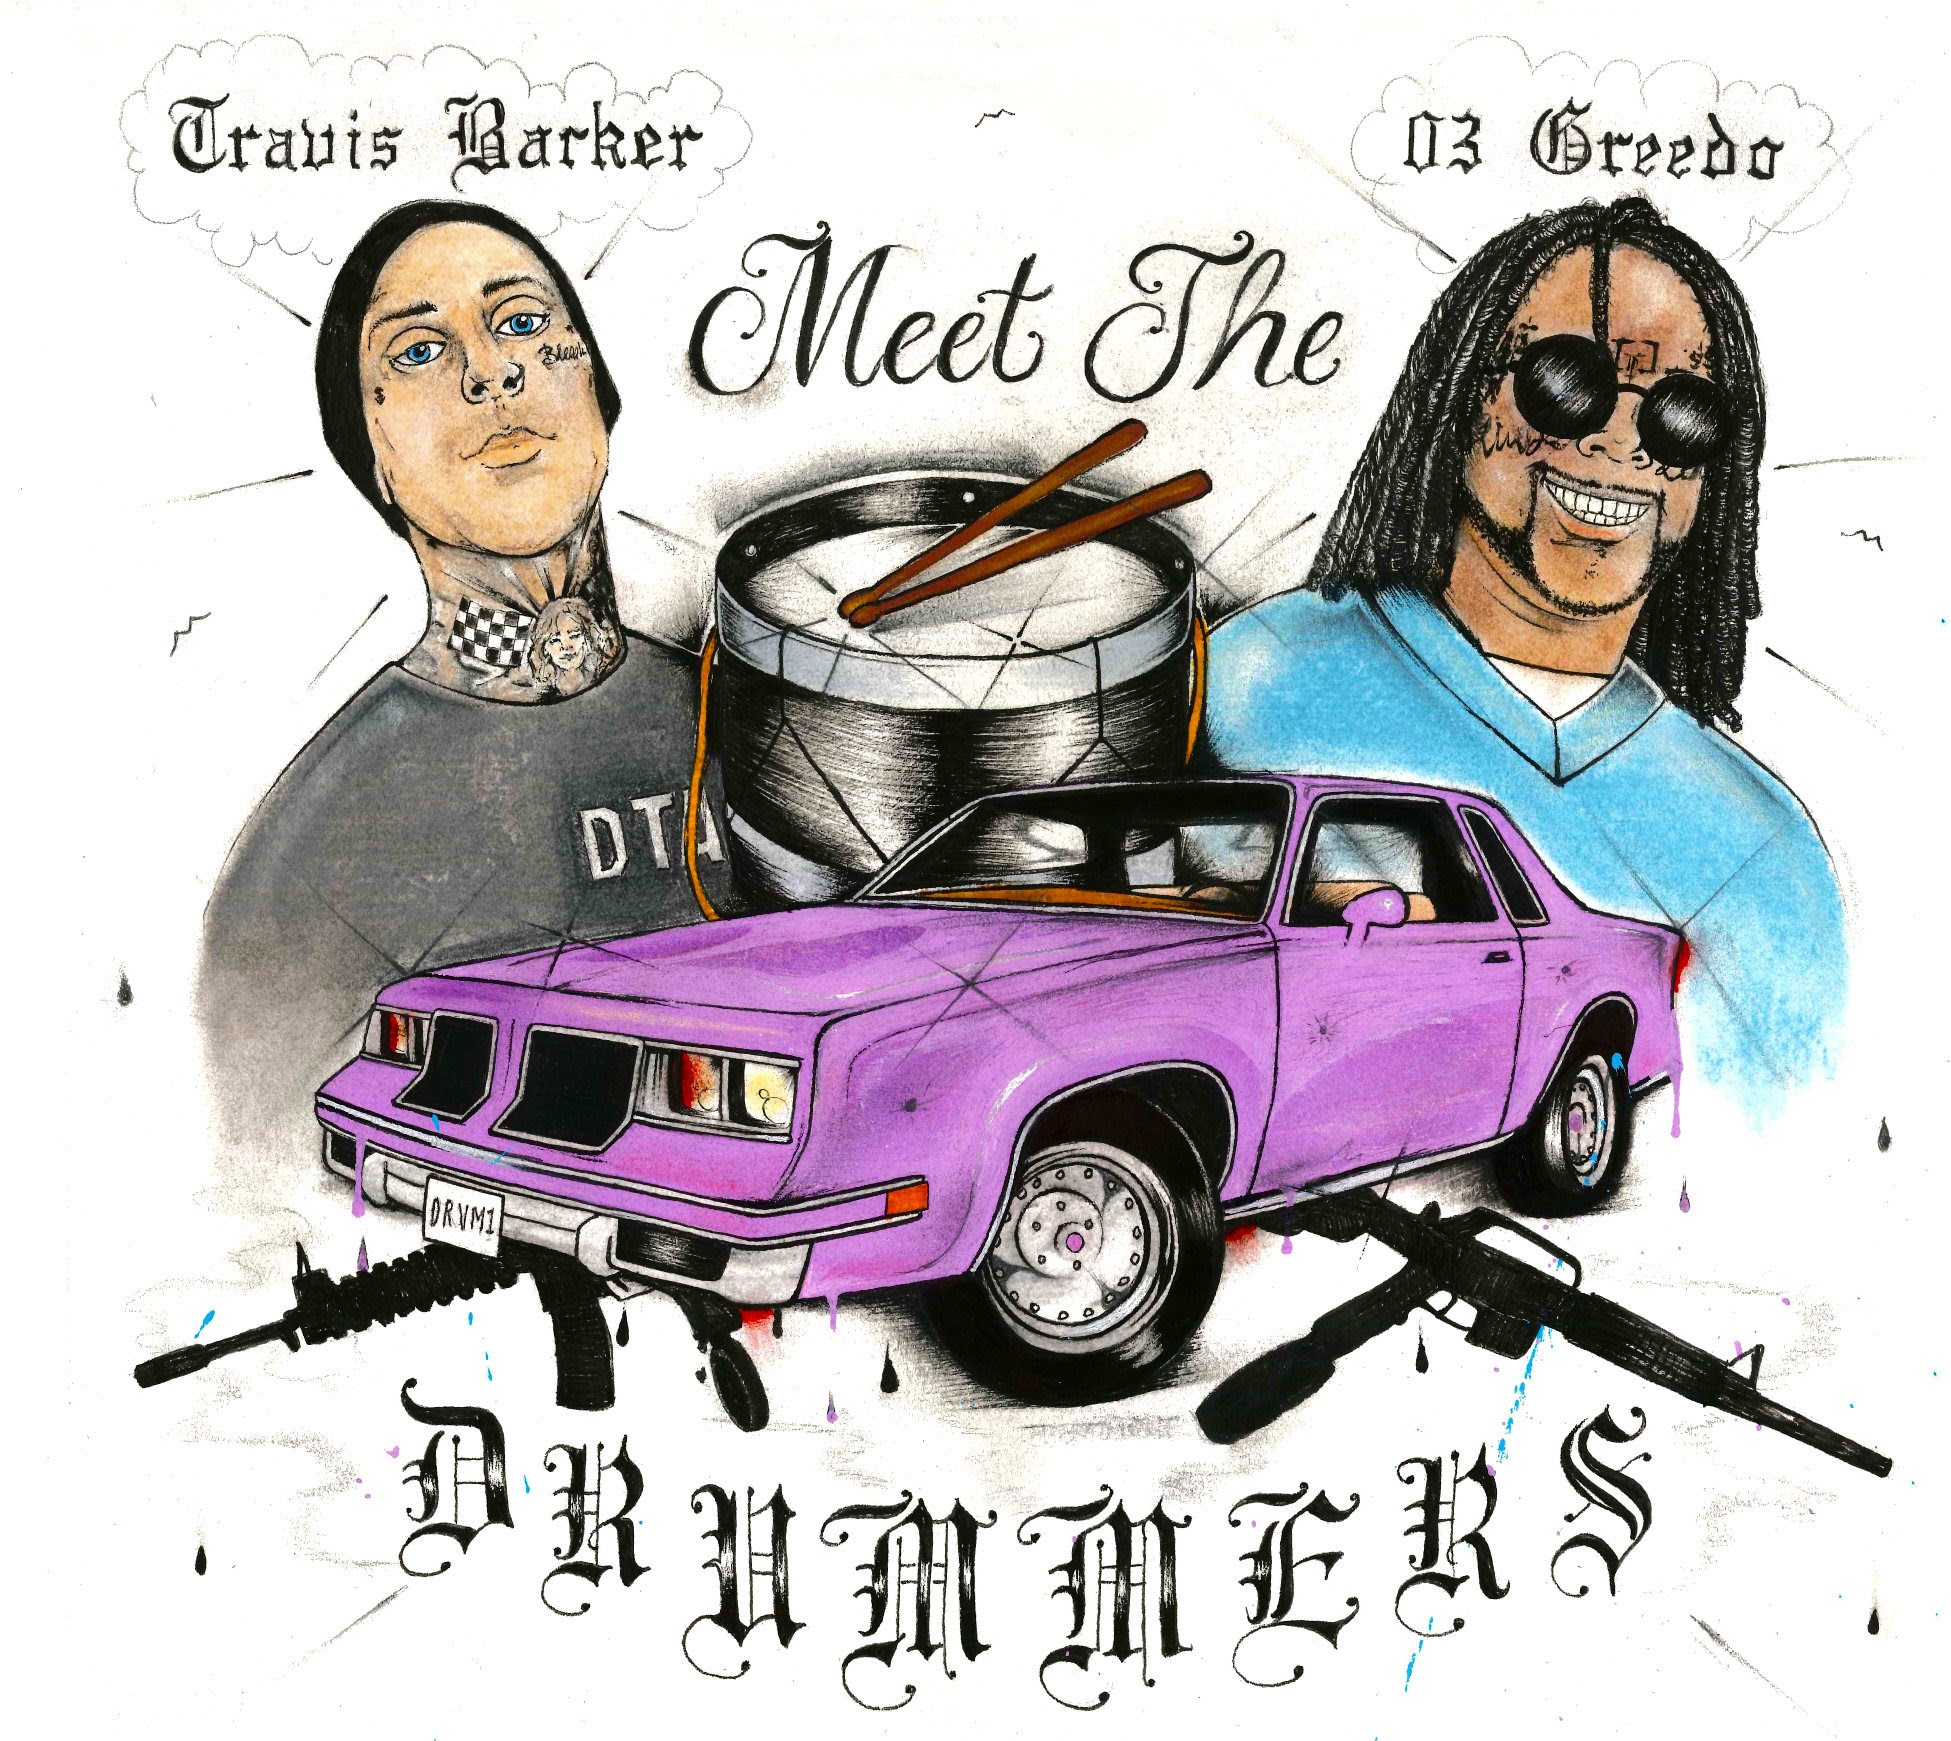 03 Greedo and Travis Barker Announce <i>Meet the Drummers</i> EP, Release “Cellout”” title=”unnamed-31-1562167889″ data-original-id=”332978″ data-adjusted-id=”332978″ class=”sm_size_full_width sm_alignment_center ” data-image-use=”multiple_use” data-image-source=”video_screenshot” />
</p>		</div>
				</div>
						</div>
					</div>
		</div>
								</div>
					</div>
		</section>
				<section data-particle_enable=